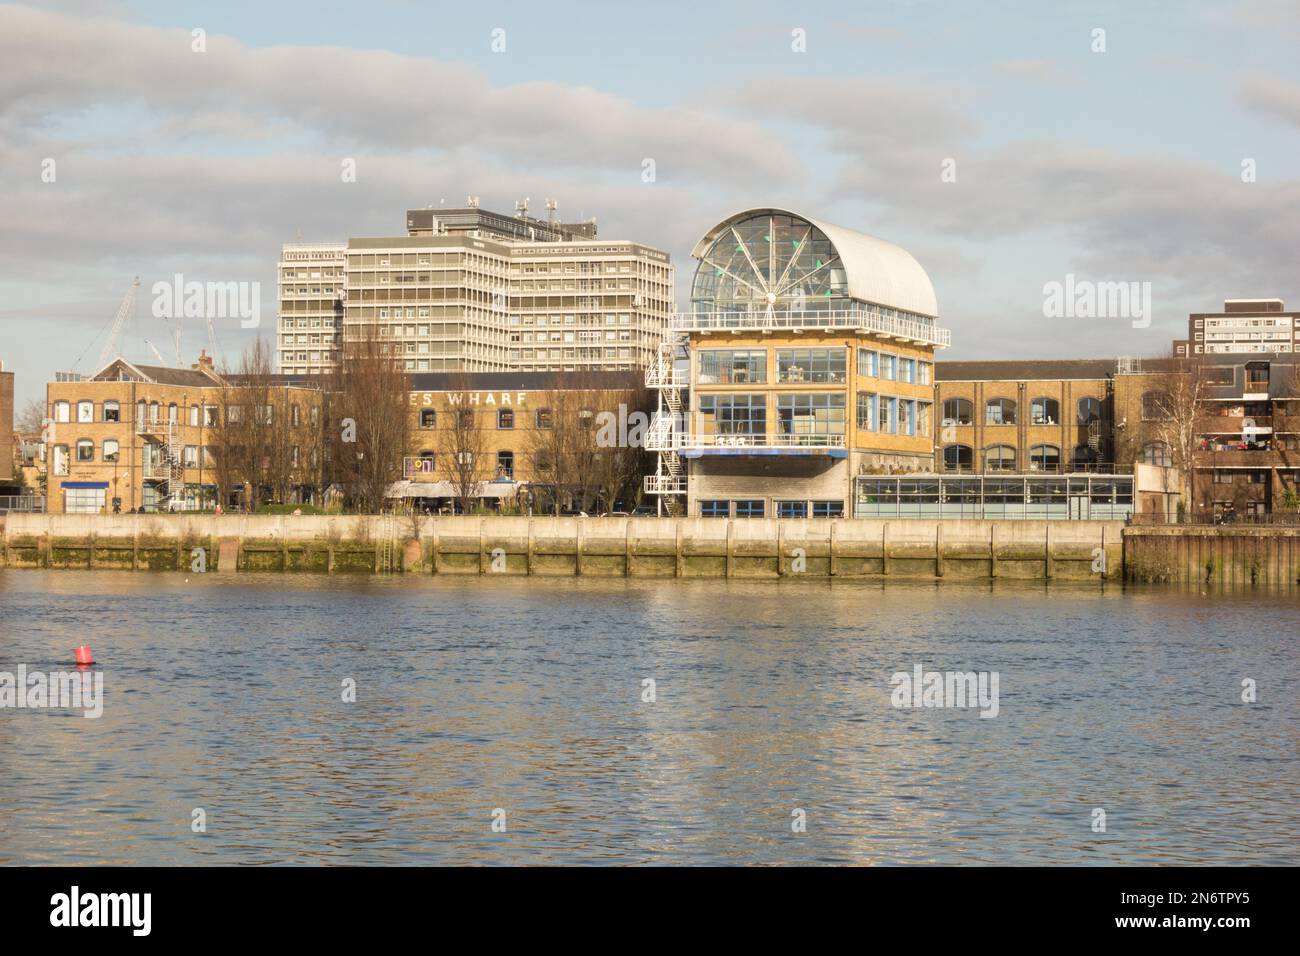 The Re: Centre Cafe Building and Charing Cross Hospital in Hammersmith, Südwest London, England, Großbritannien Stockfoto